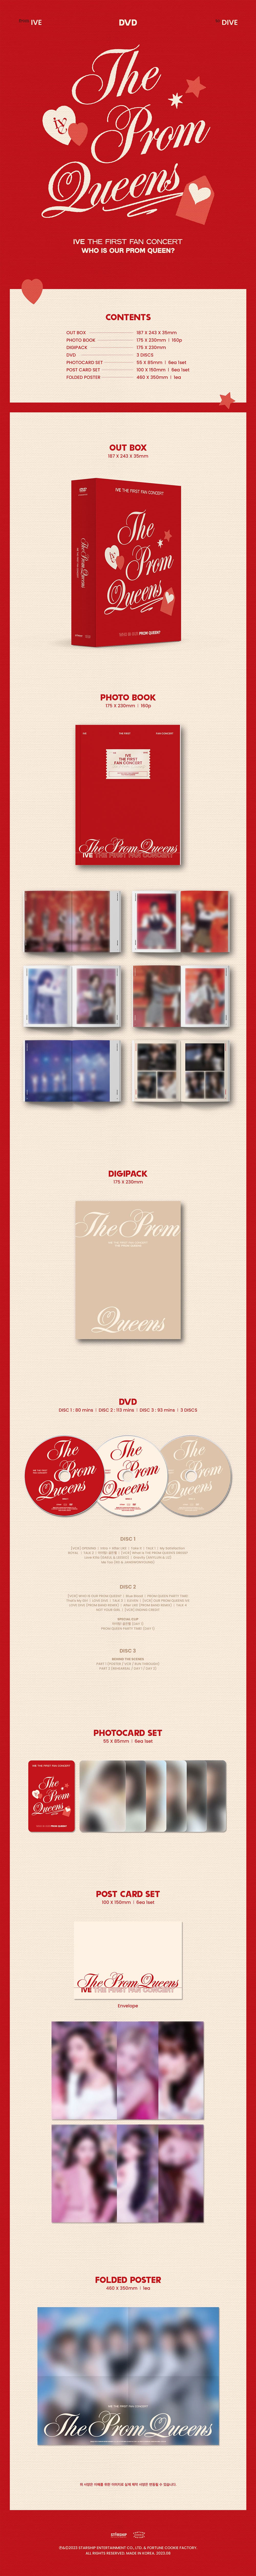 (IVE) - THE FIRST FAN CONCERT [The Prom Queens] Blu-ray